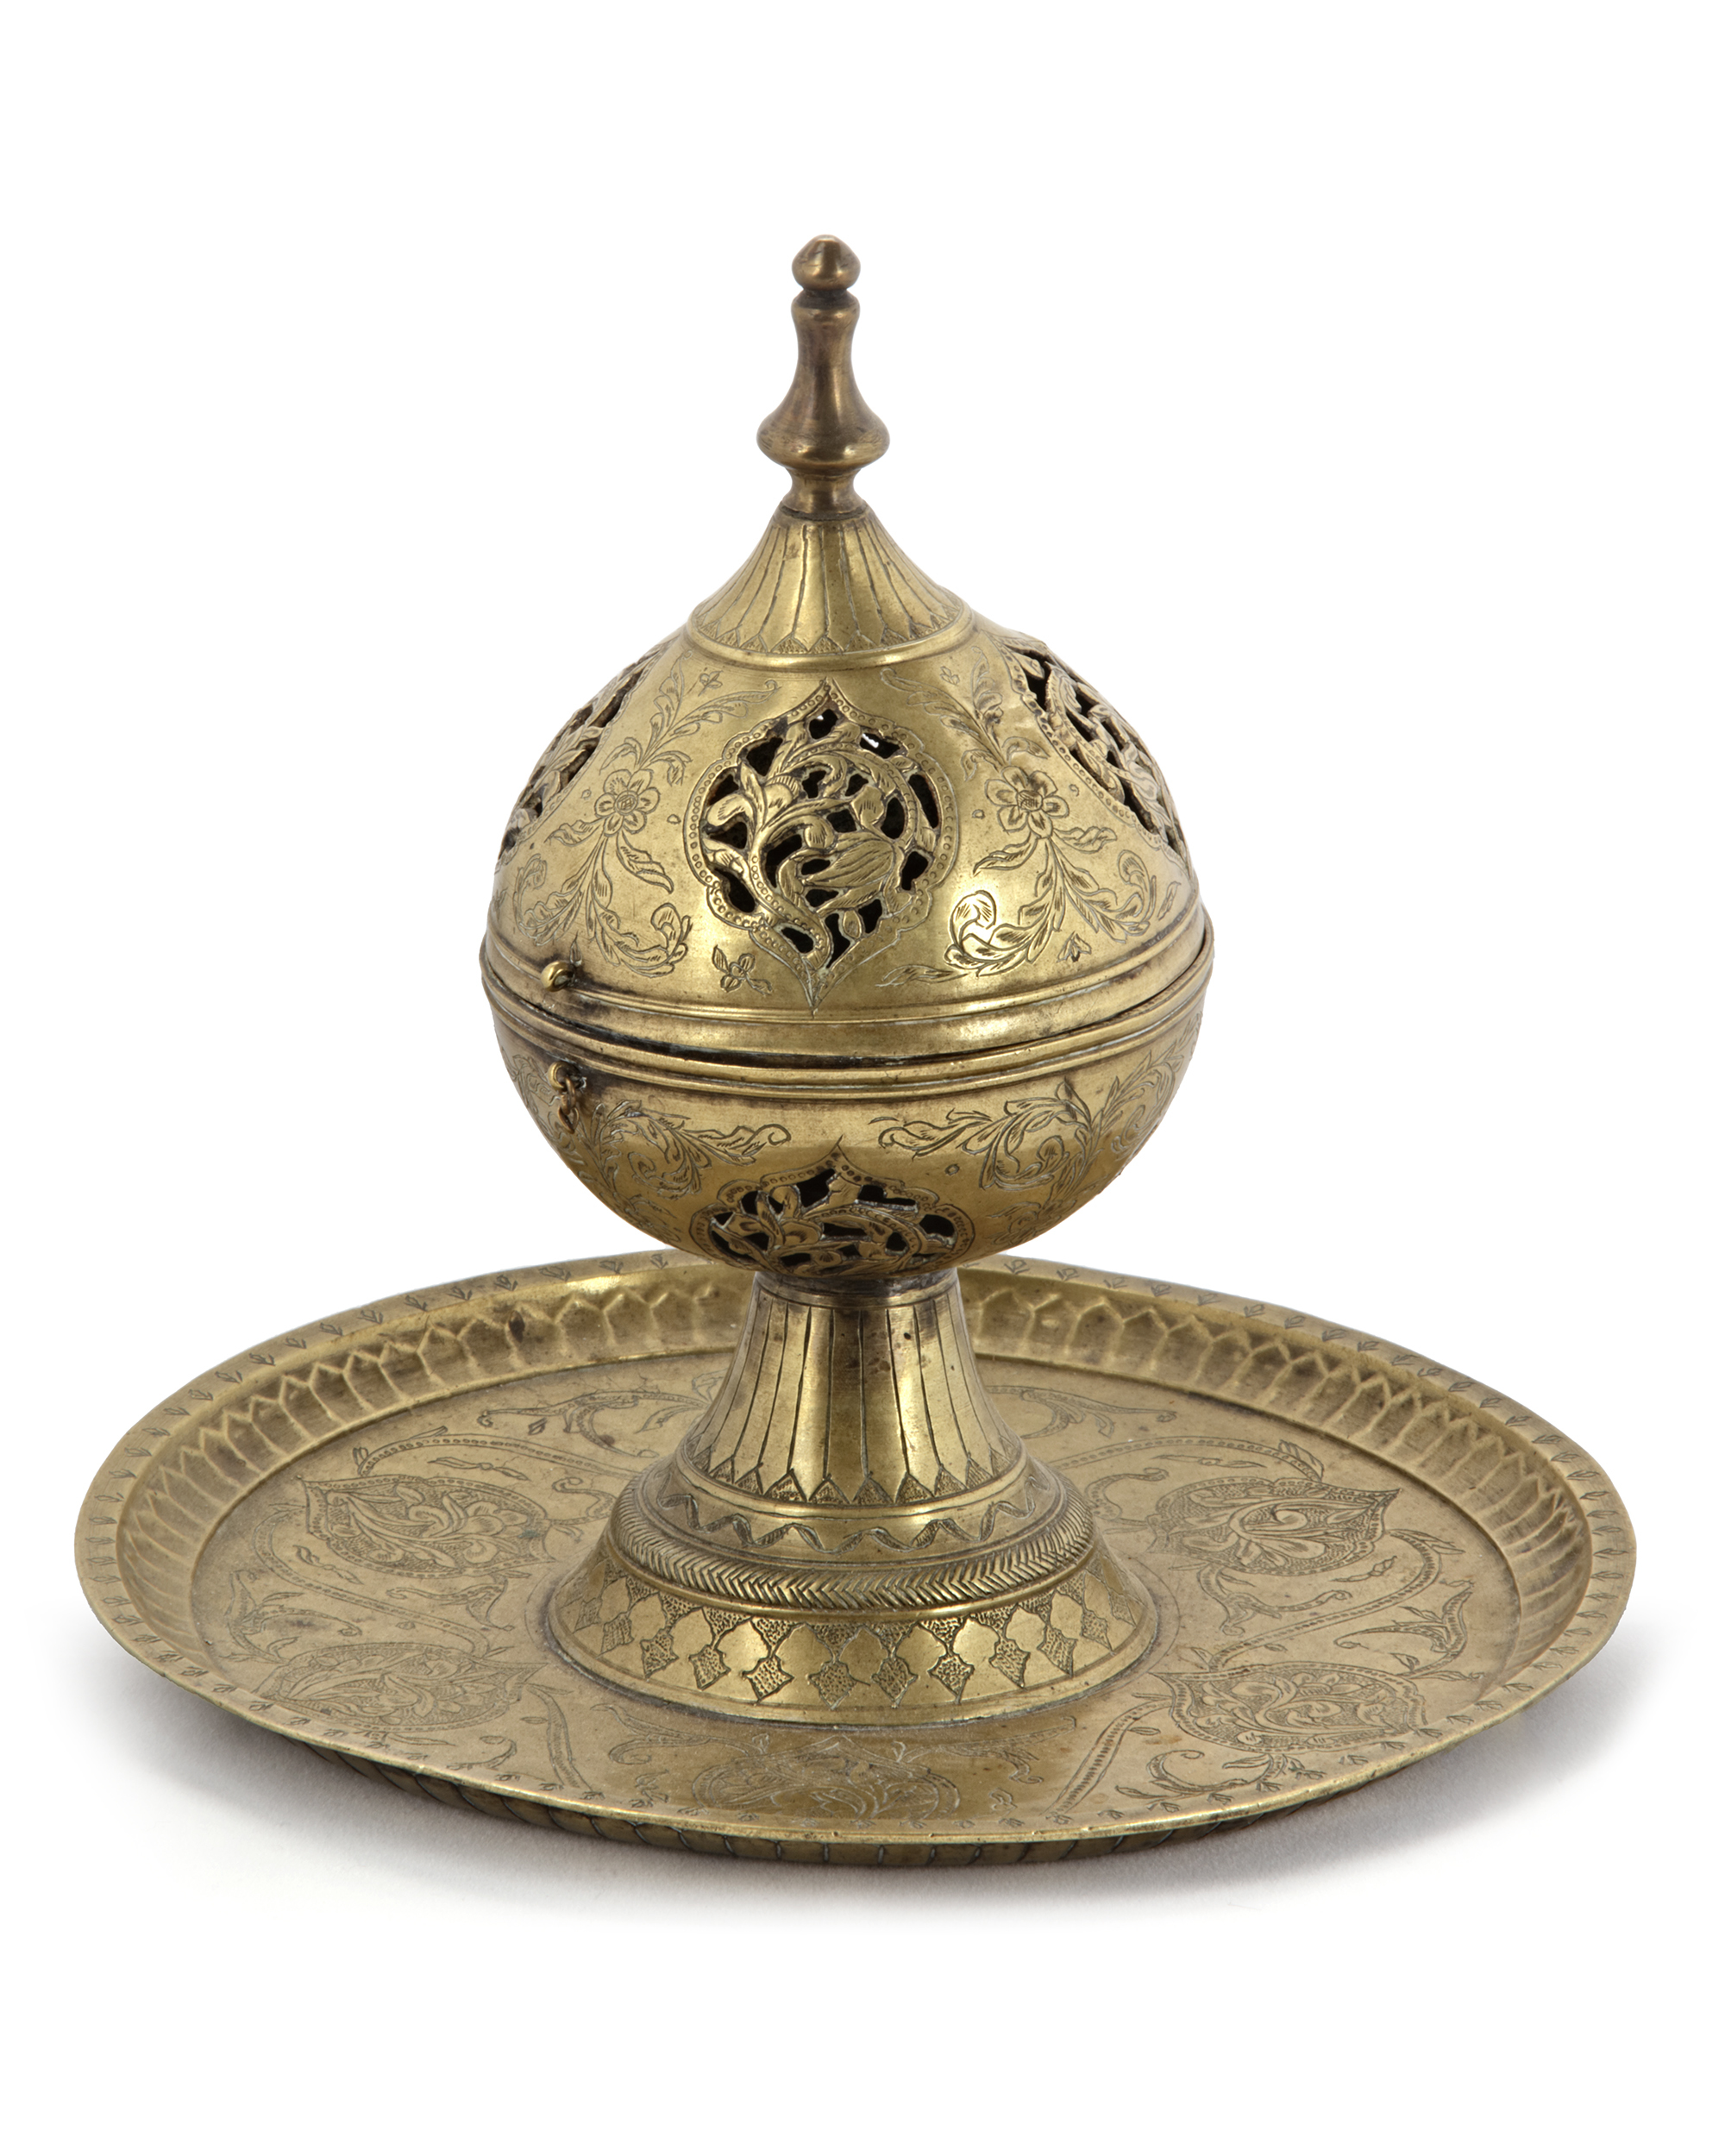 A BRASS INCENSE BURNER, DECCAN, 16TH CENTURY - Image 6 of 10